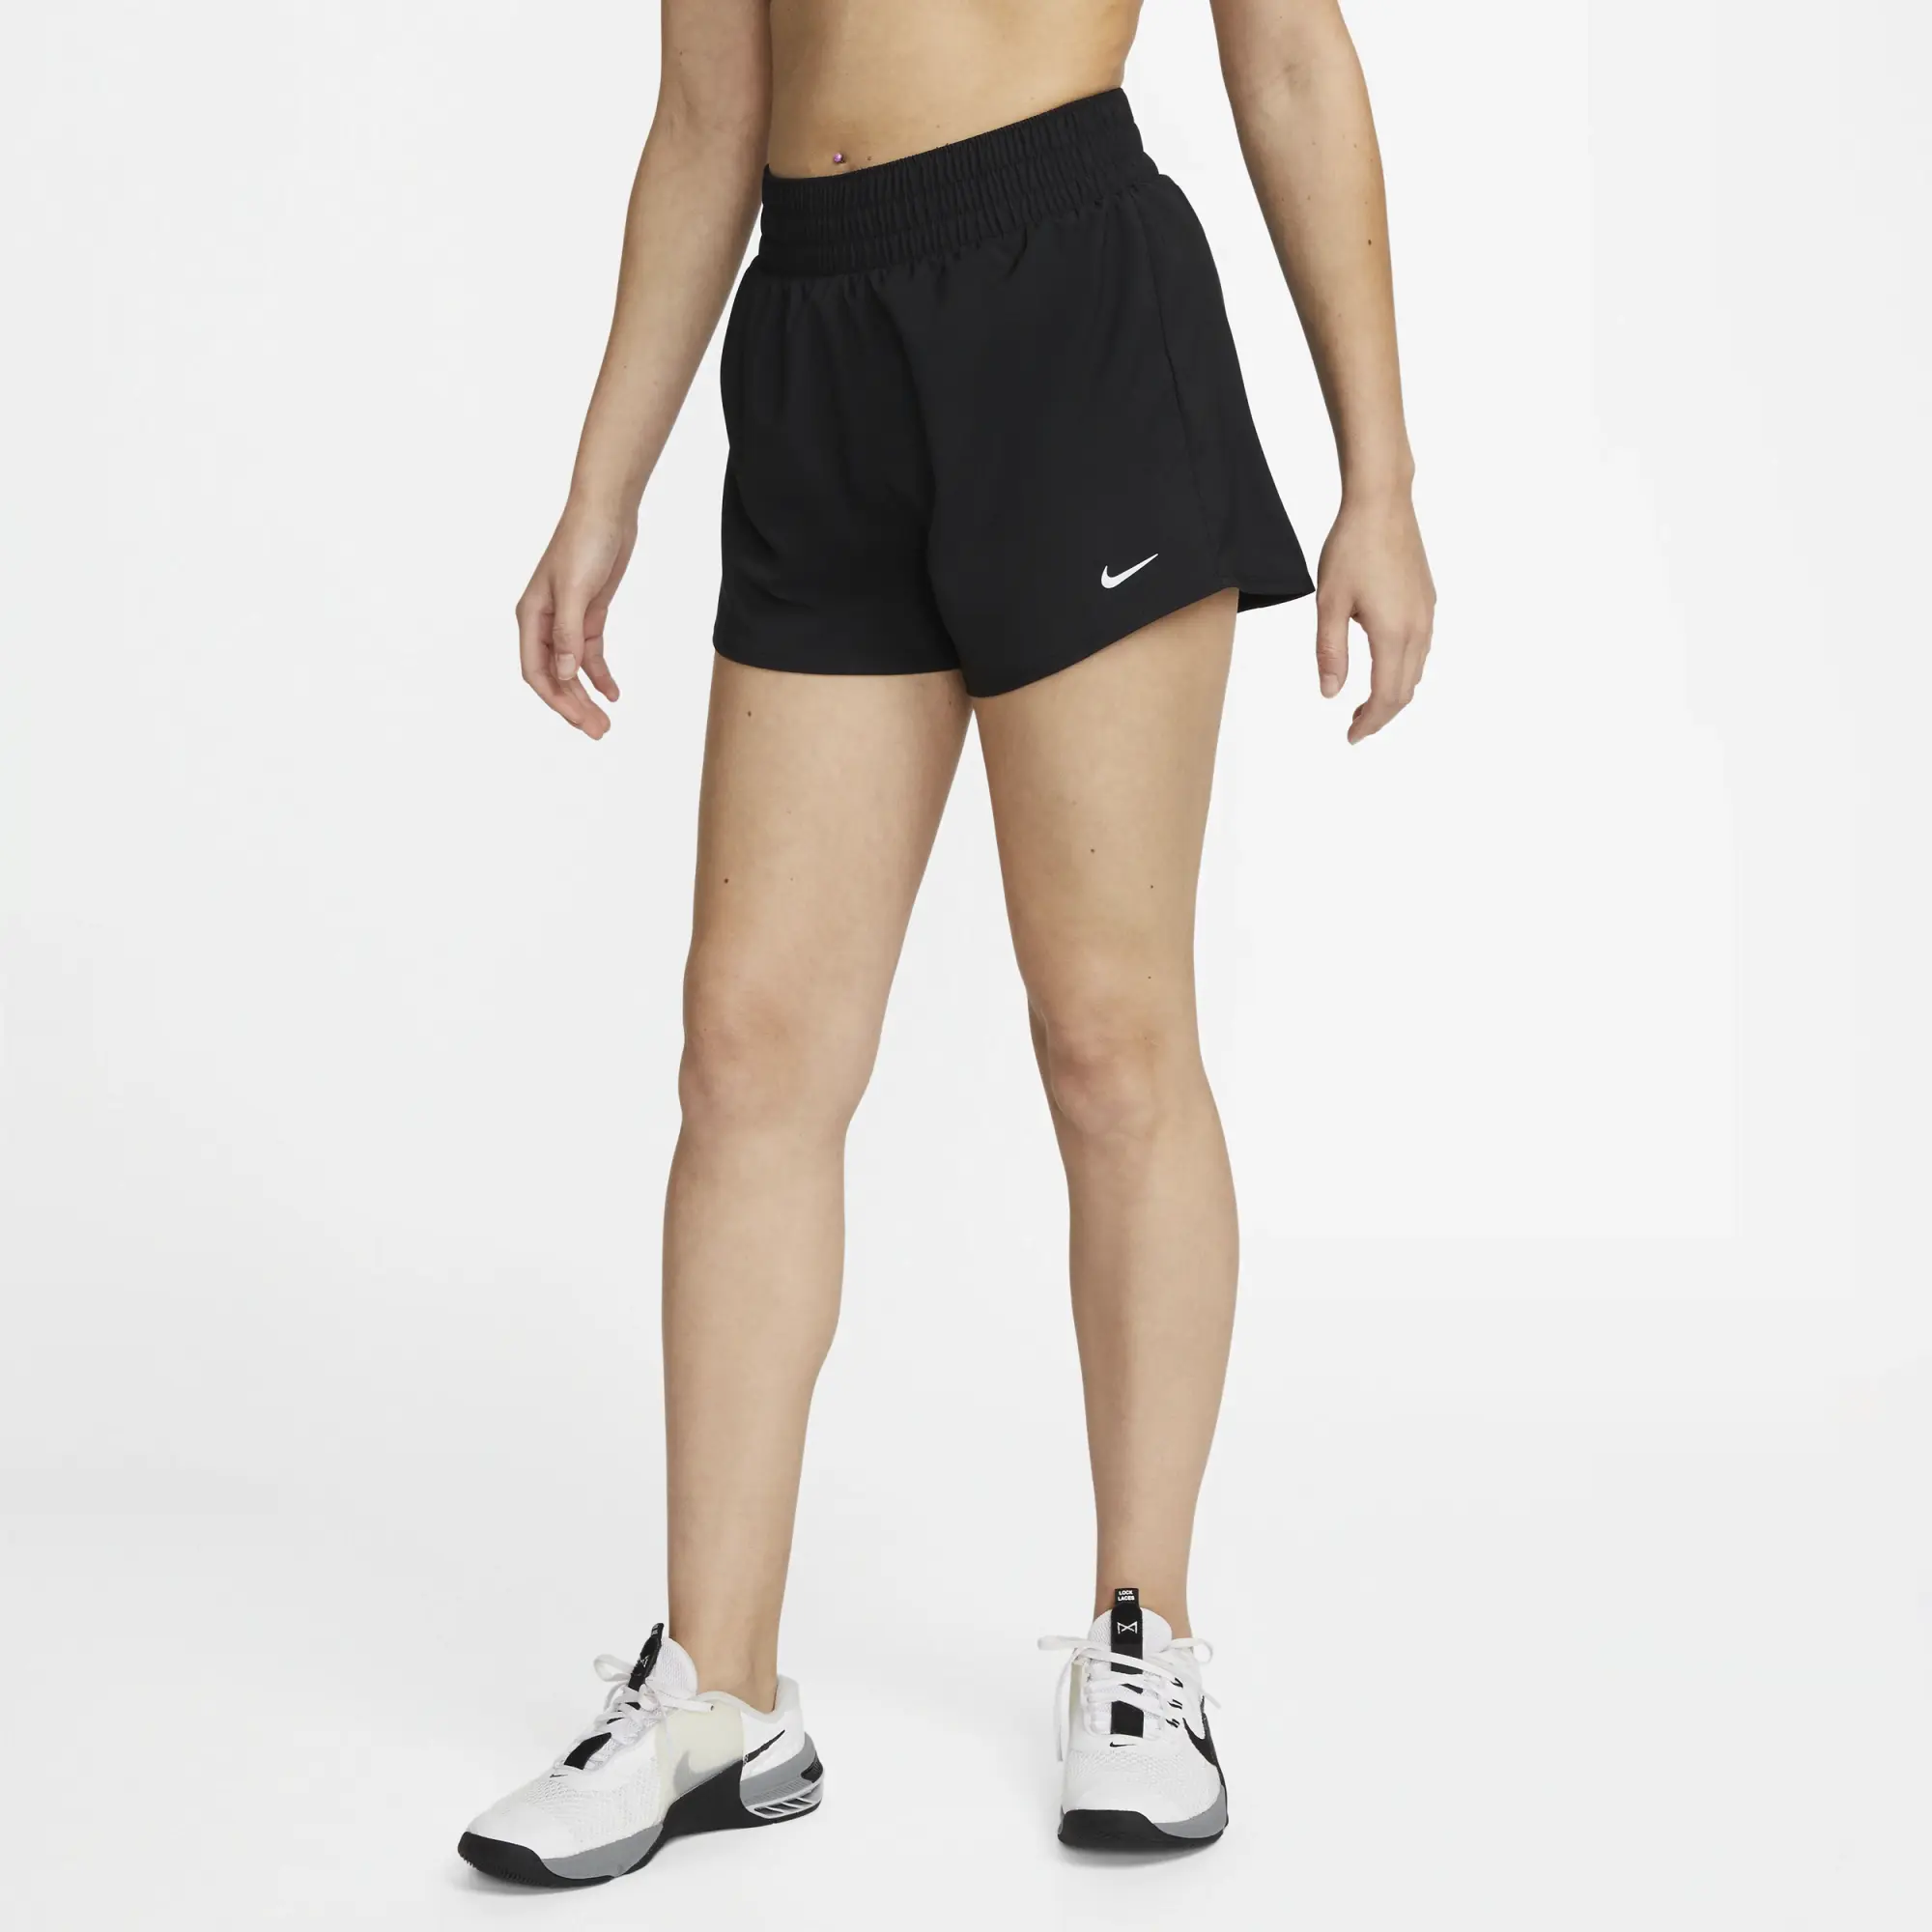 Nike One Women's Dri-FIT High-Waisted 8cm (approx.) Brief-Lined Shorts - Black